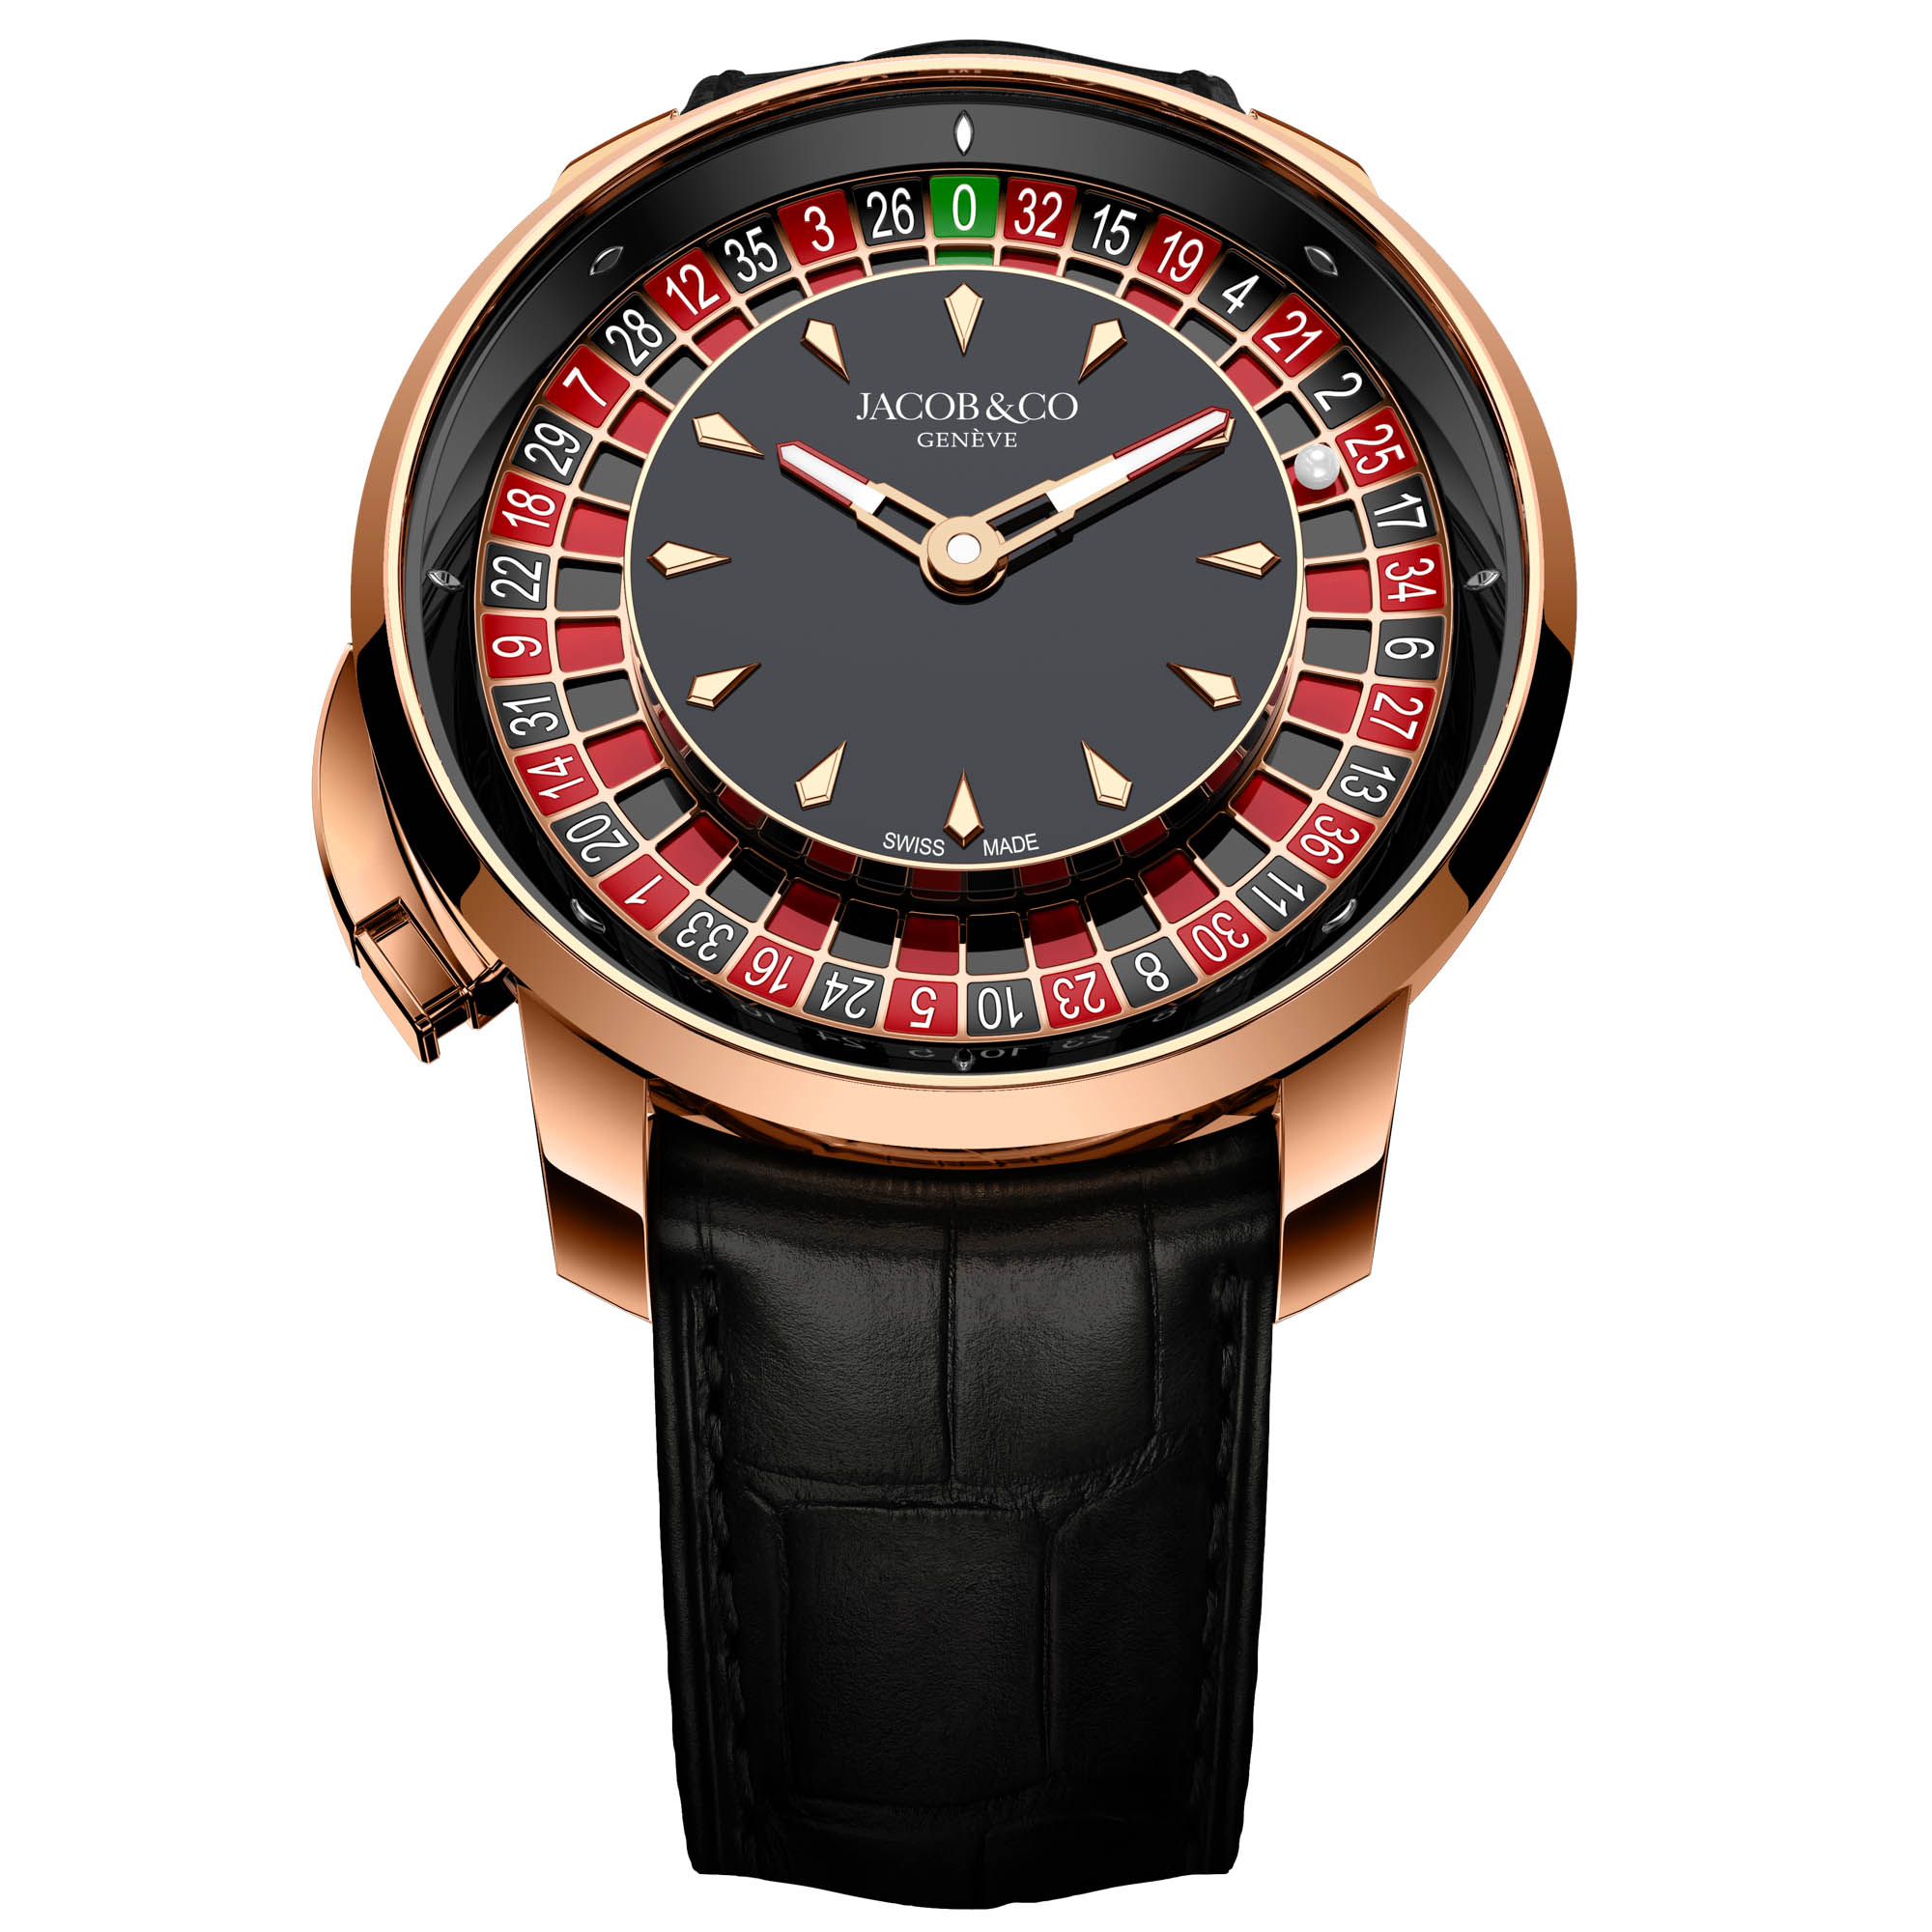 Omega Watches in Casino Royale | The Watch Club by SwissWatchExpo